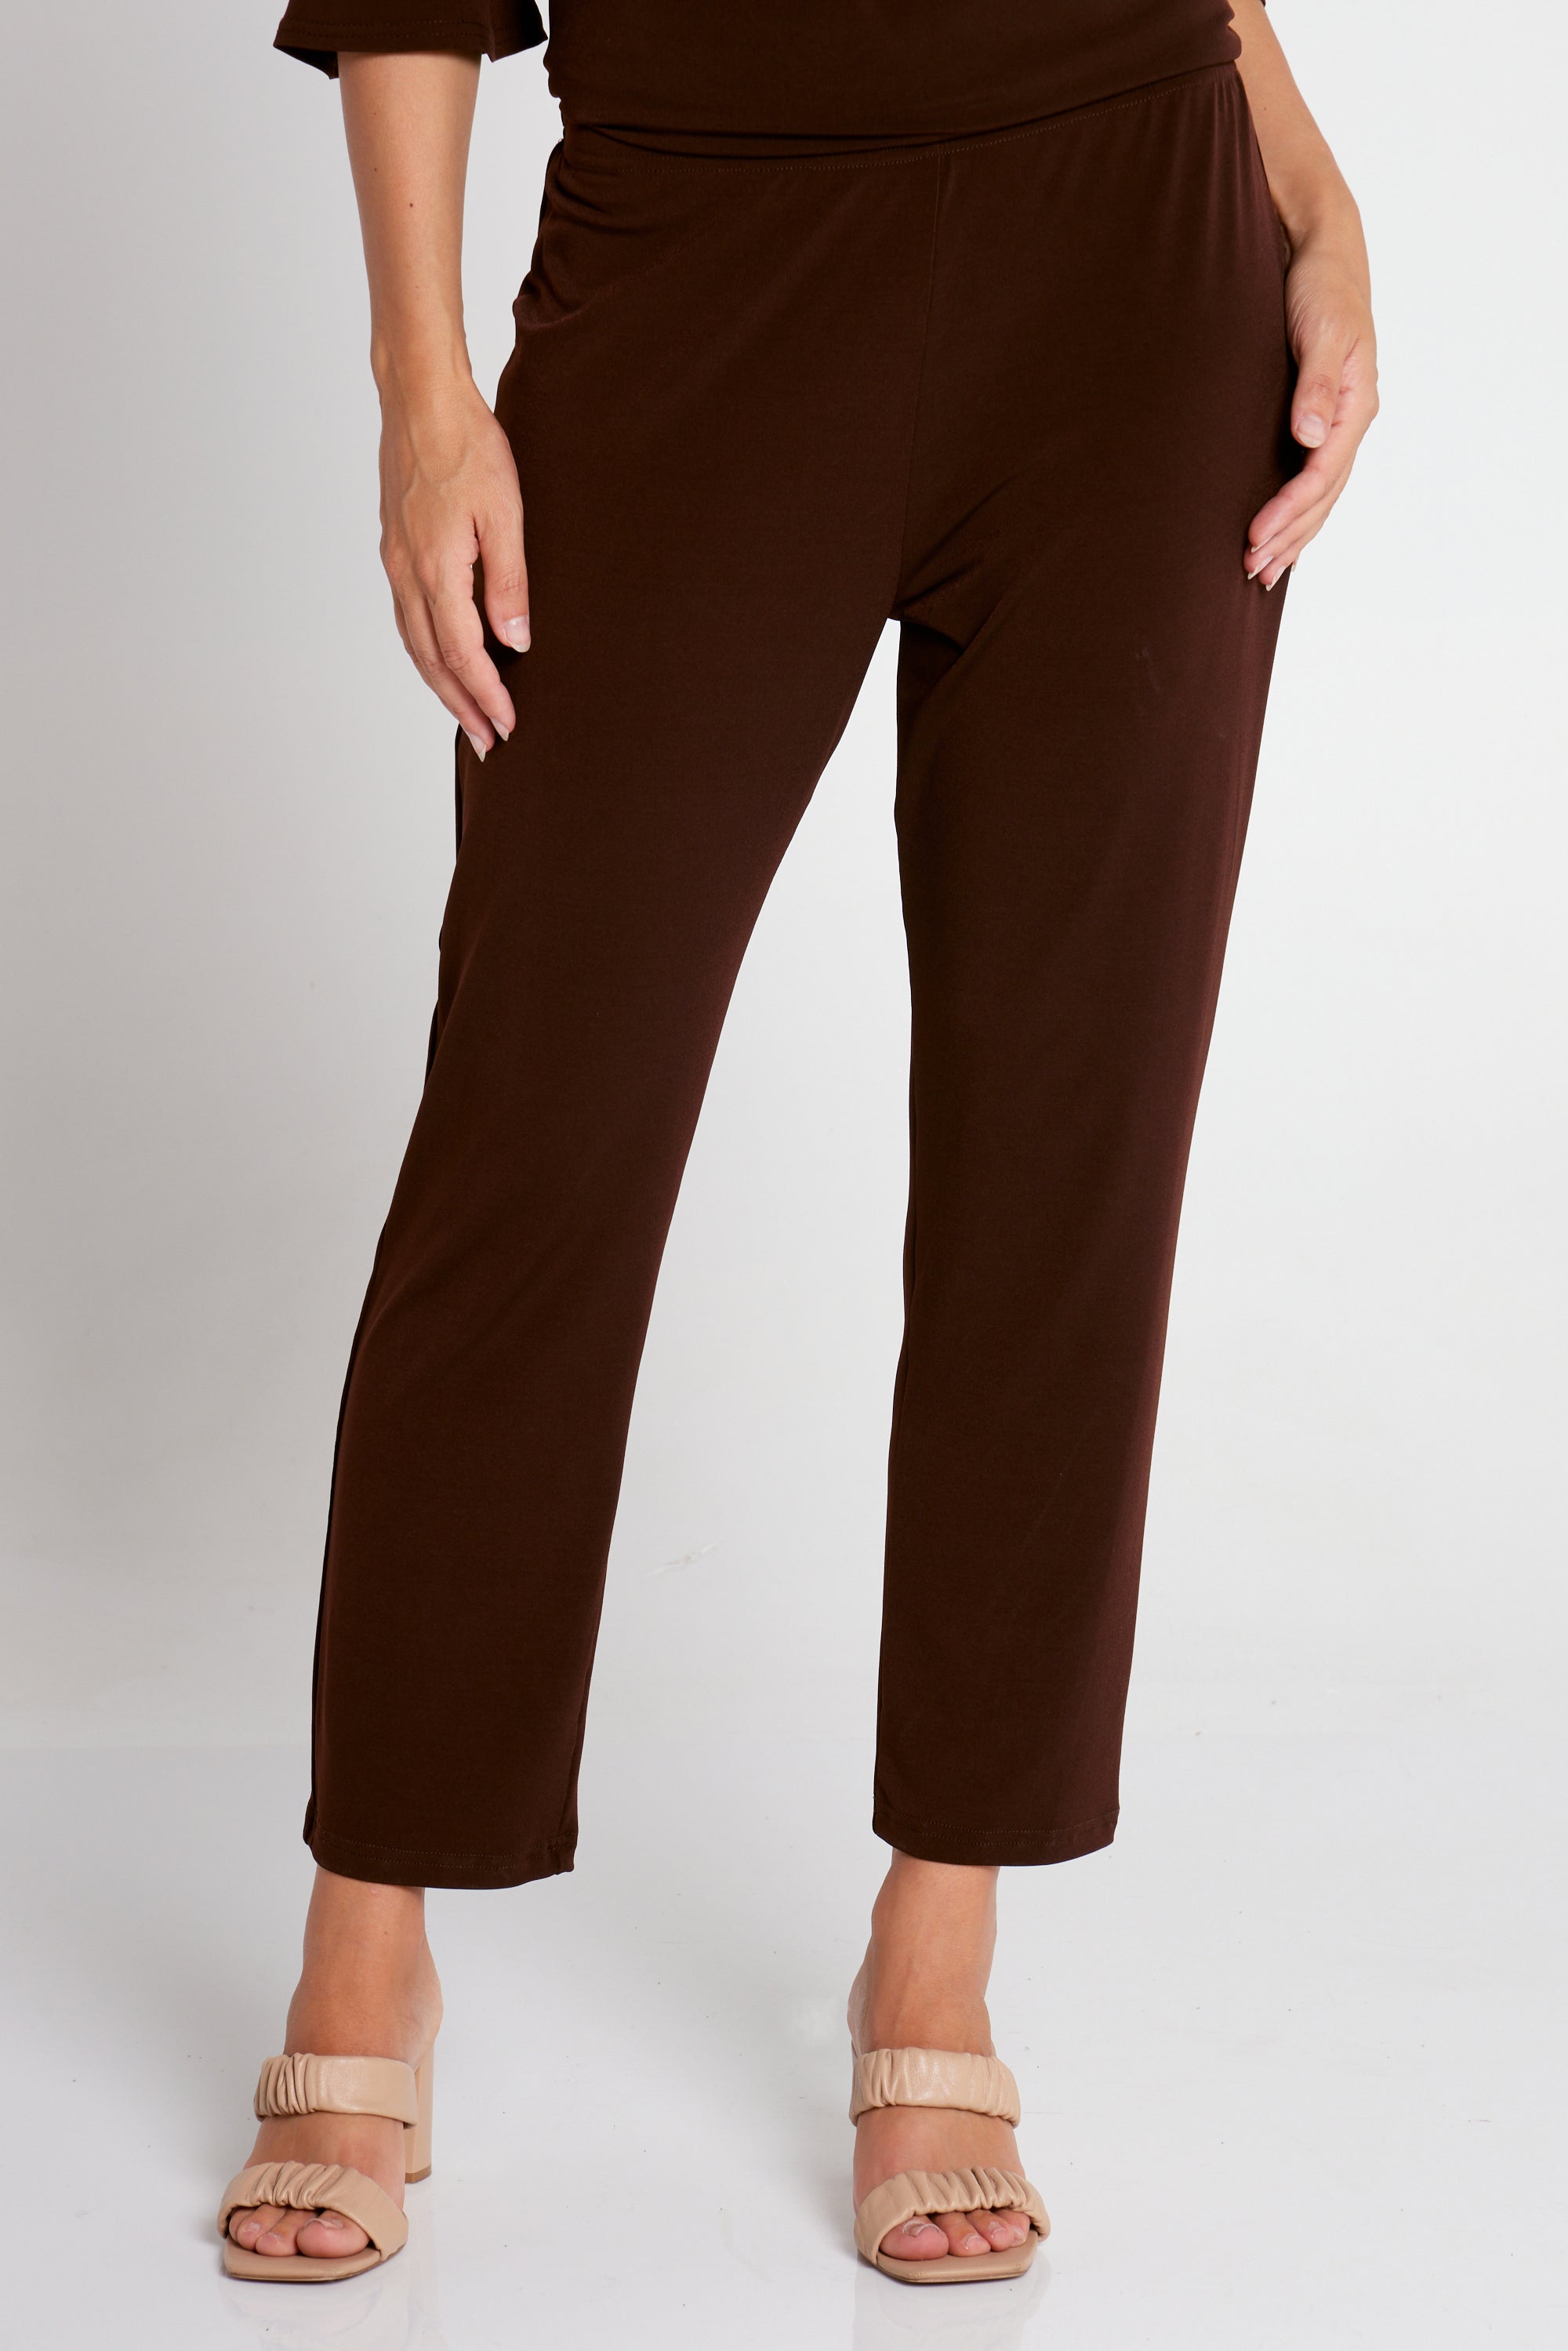 UNICOR Store: Chocolate Brown Elastic Waist Trousers without Pockets